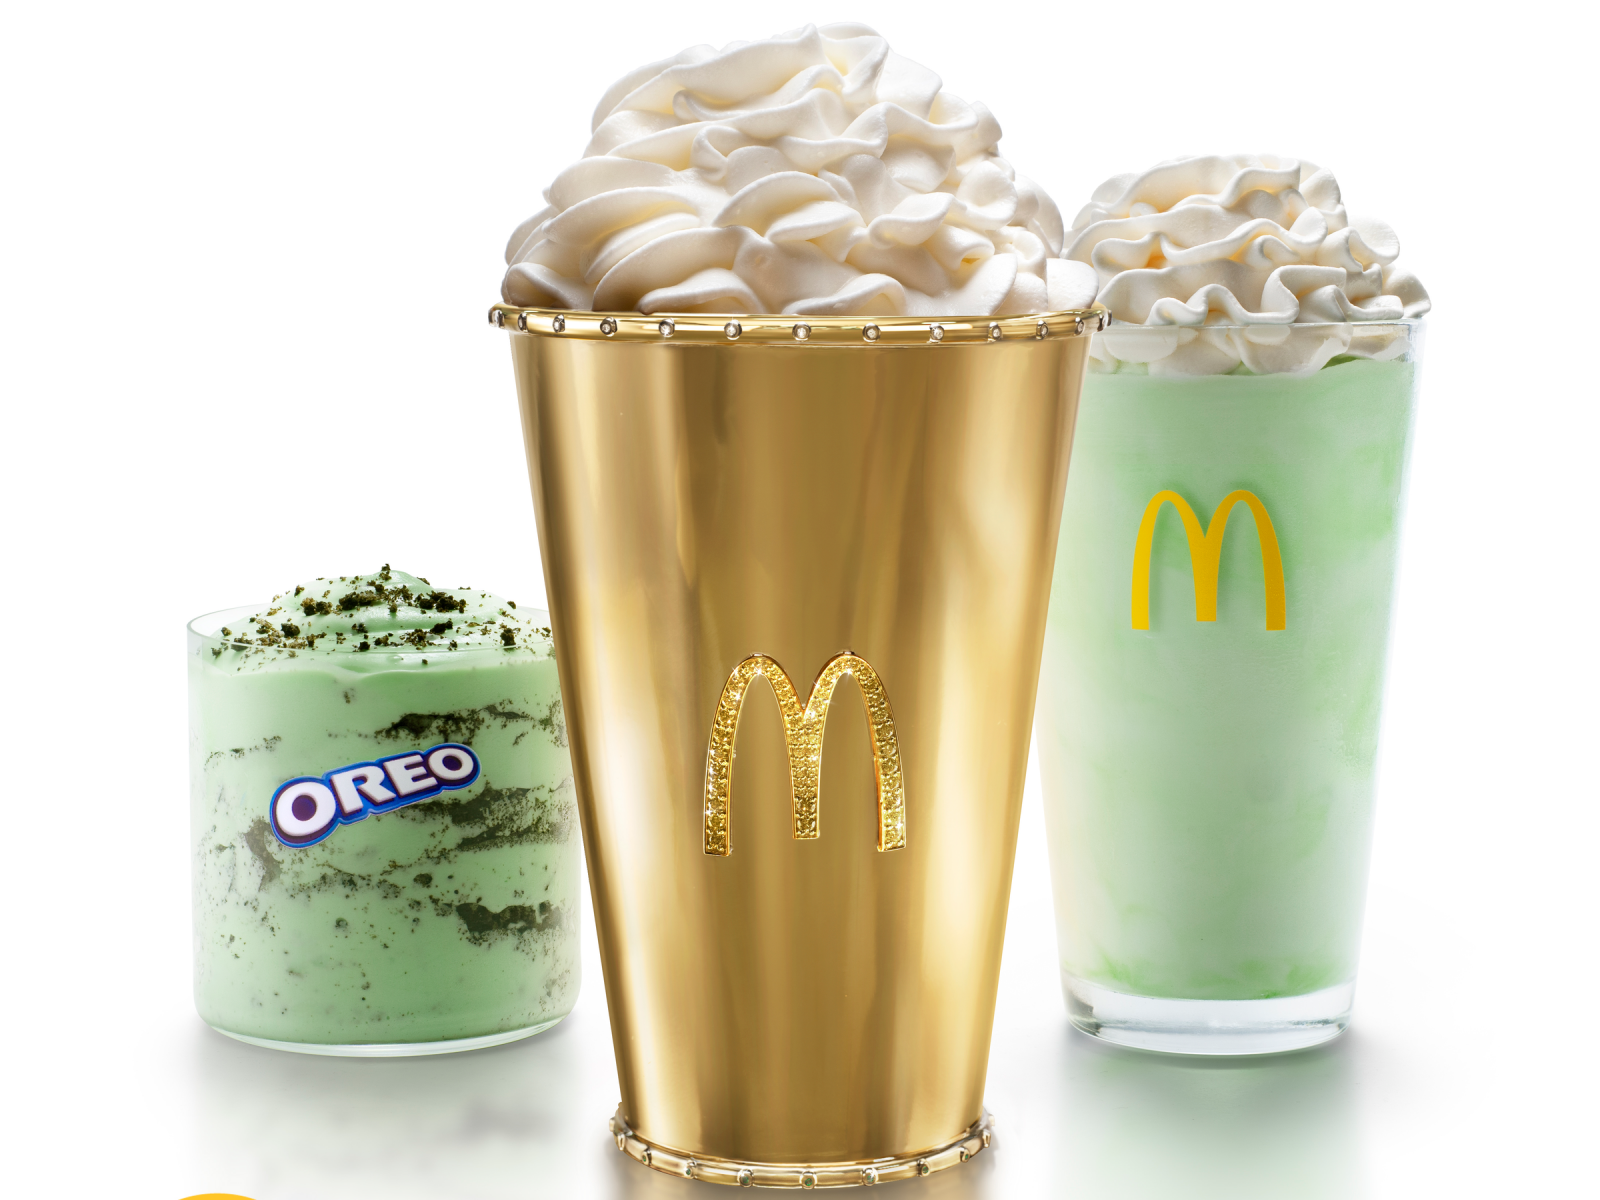 McDonald's is auctioning off 18k gold Shamrock Shake cup worth nearly $100,000 to celebrate the Shamrock Shake's 50th anniversary